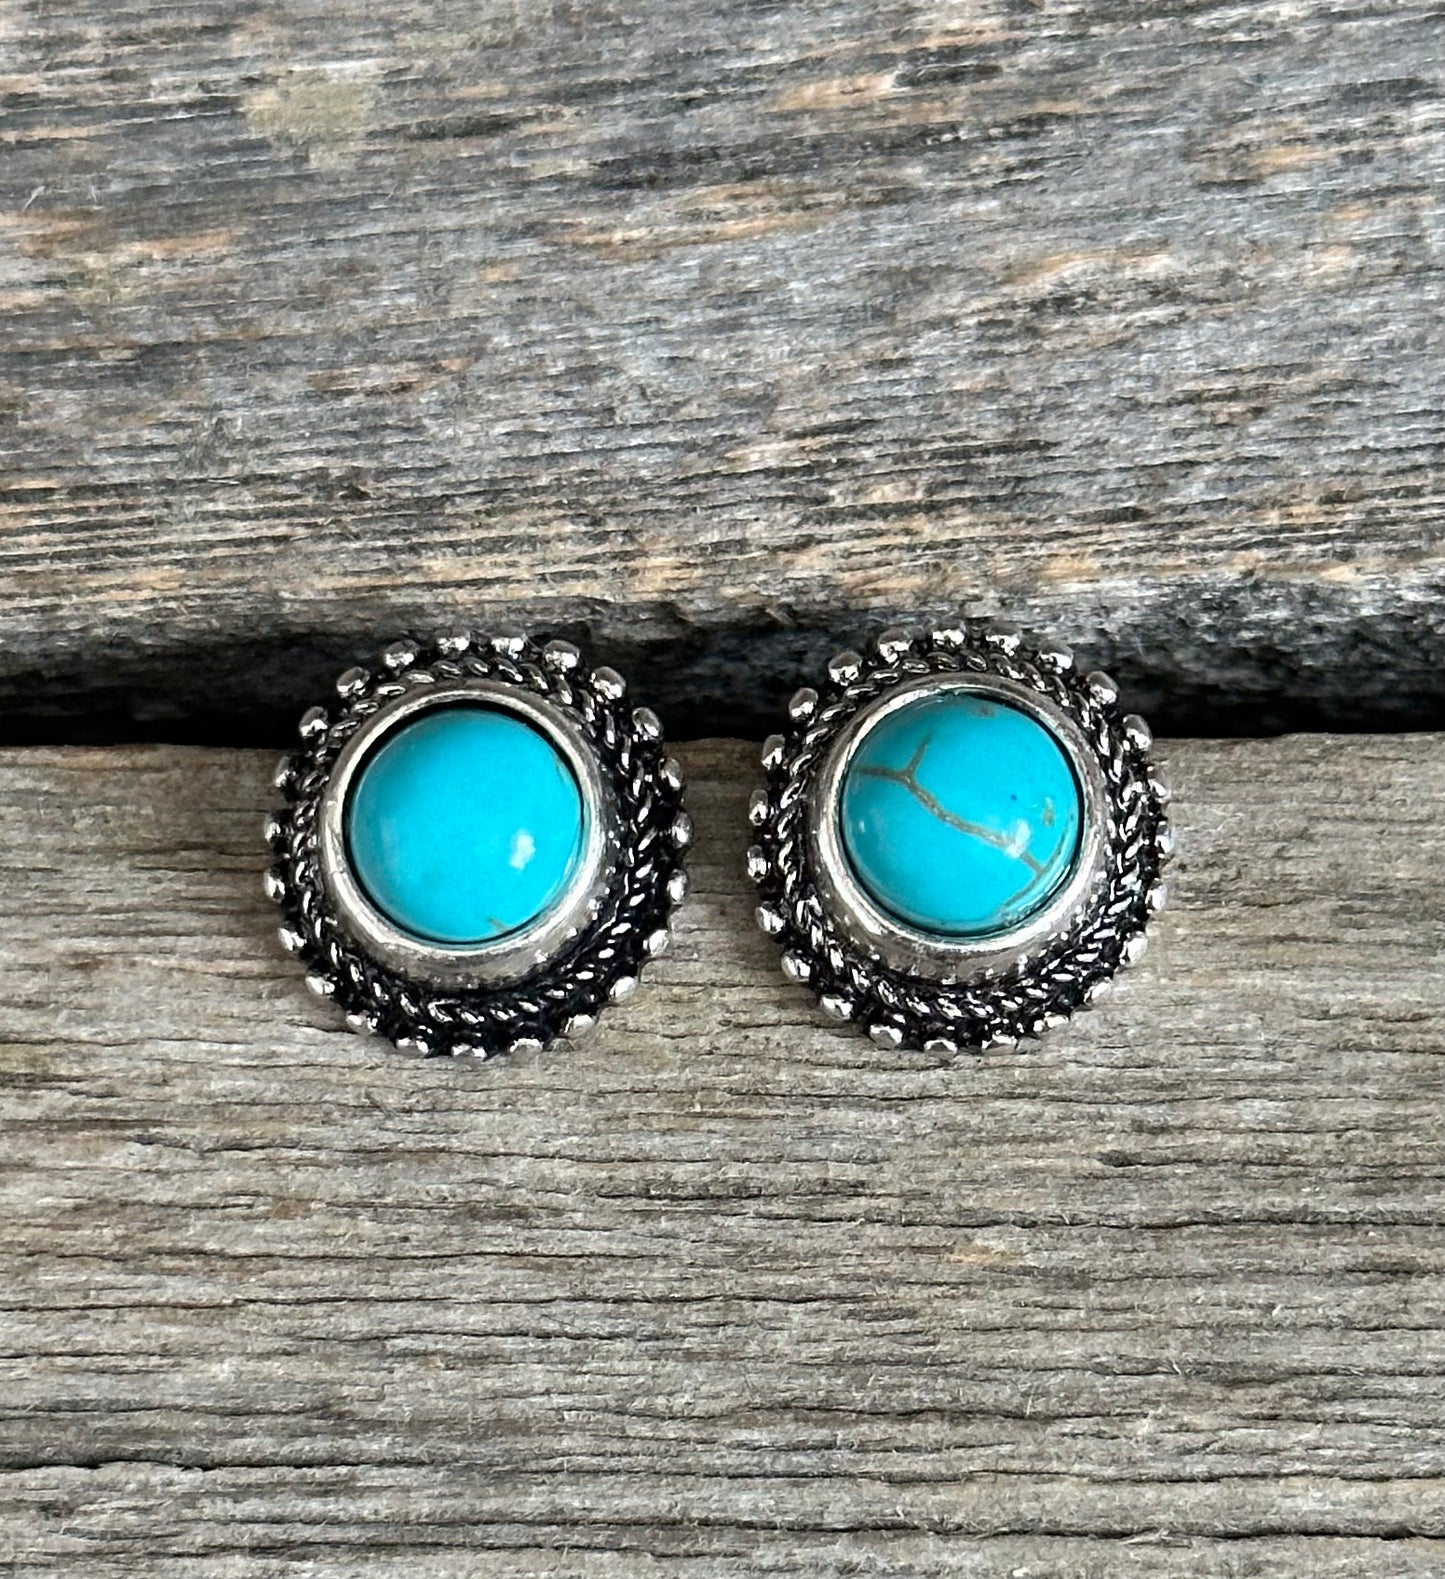 Turquoise Round Stone Earrings